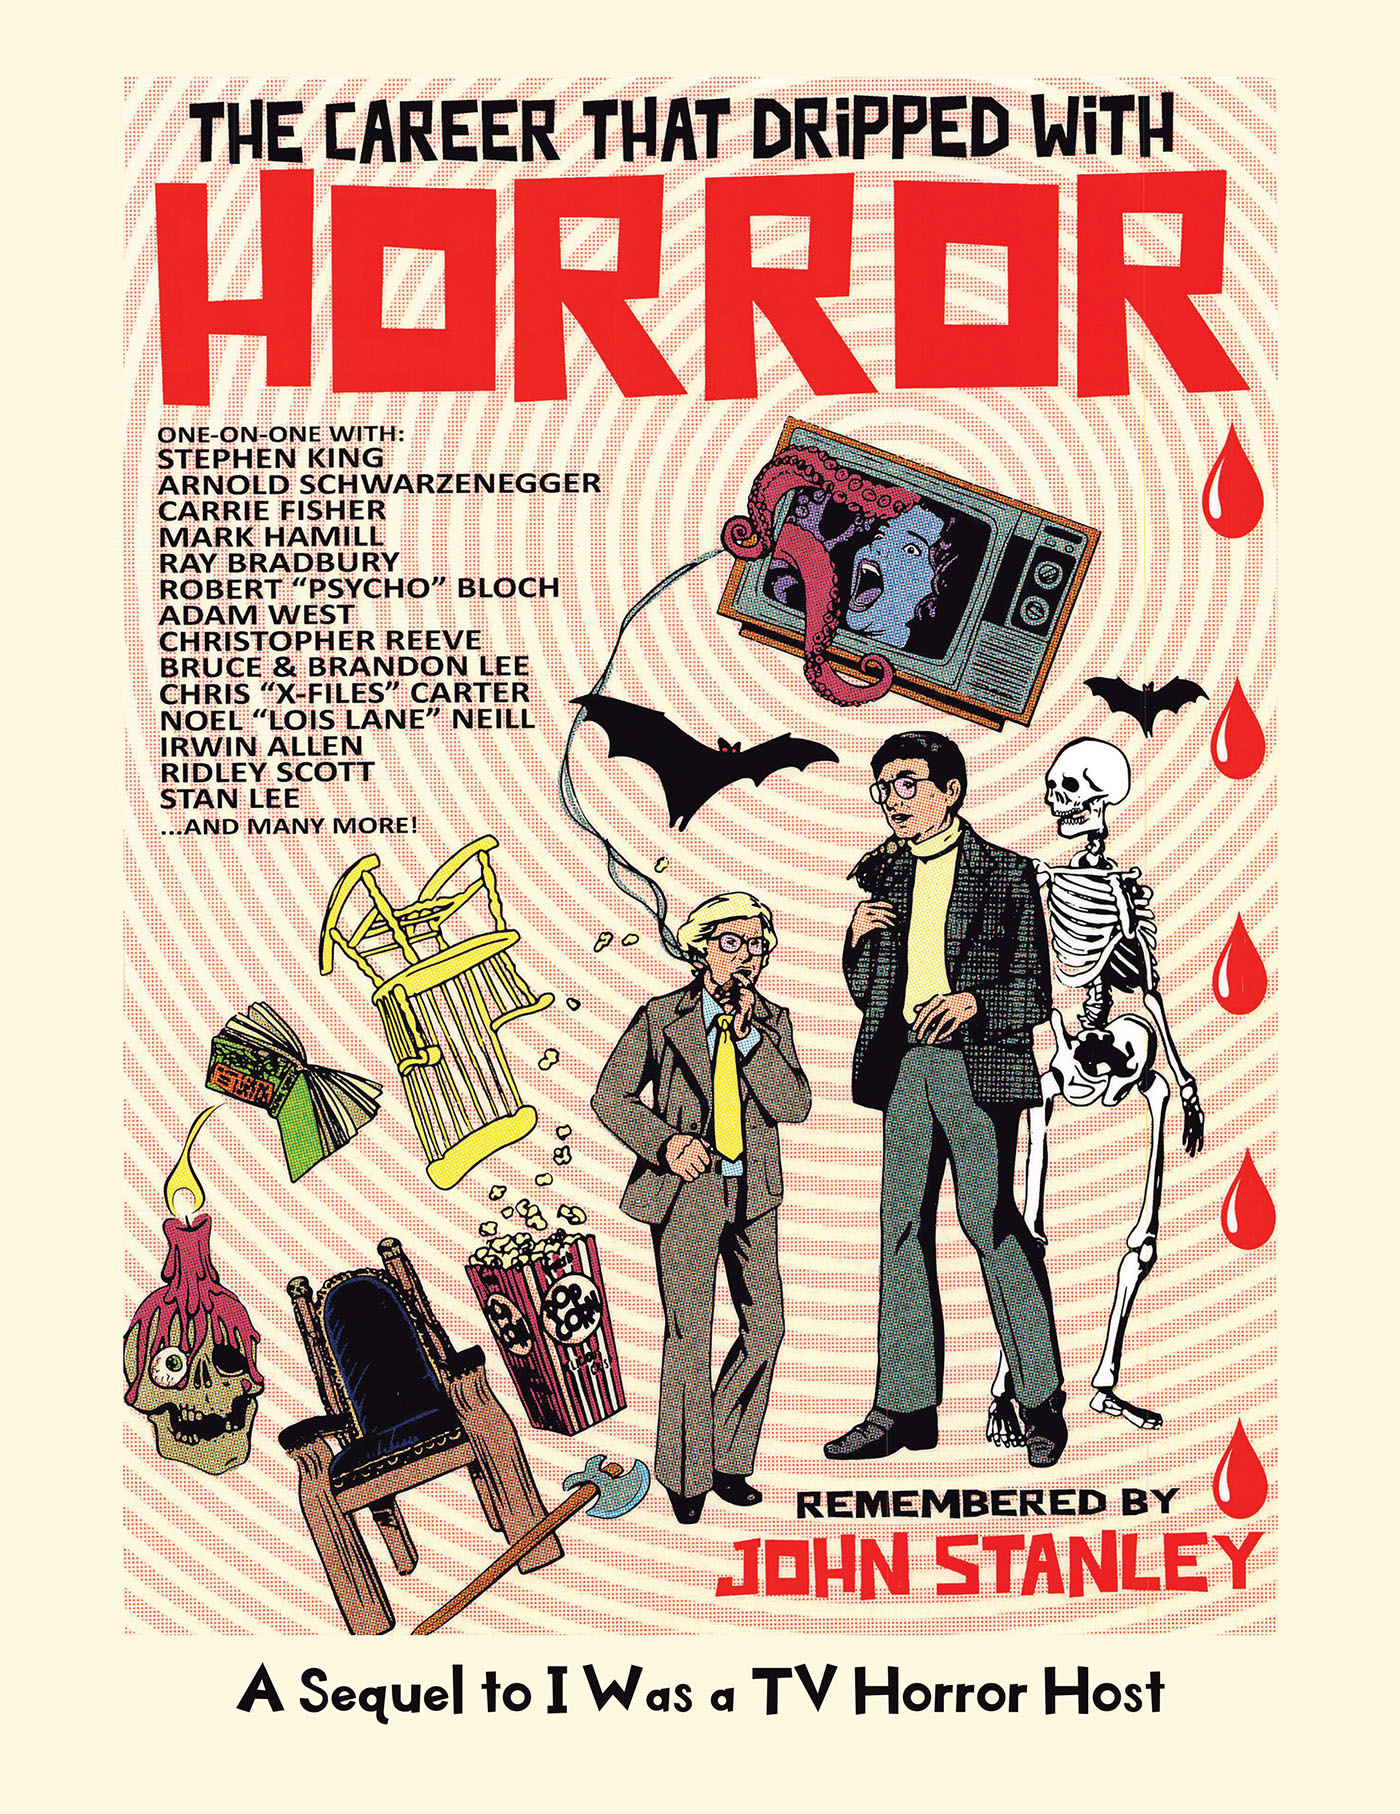 Author John Stanley’s New Book, “The Career That Dripped With Horror,” is a Thrilling Trip Down Memory Lane as Recalled by the Host of Creature Features